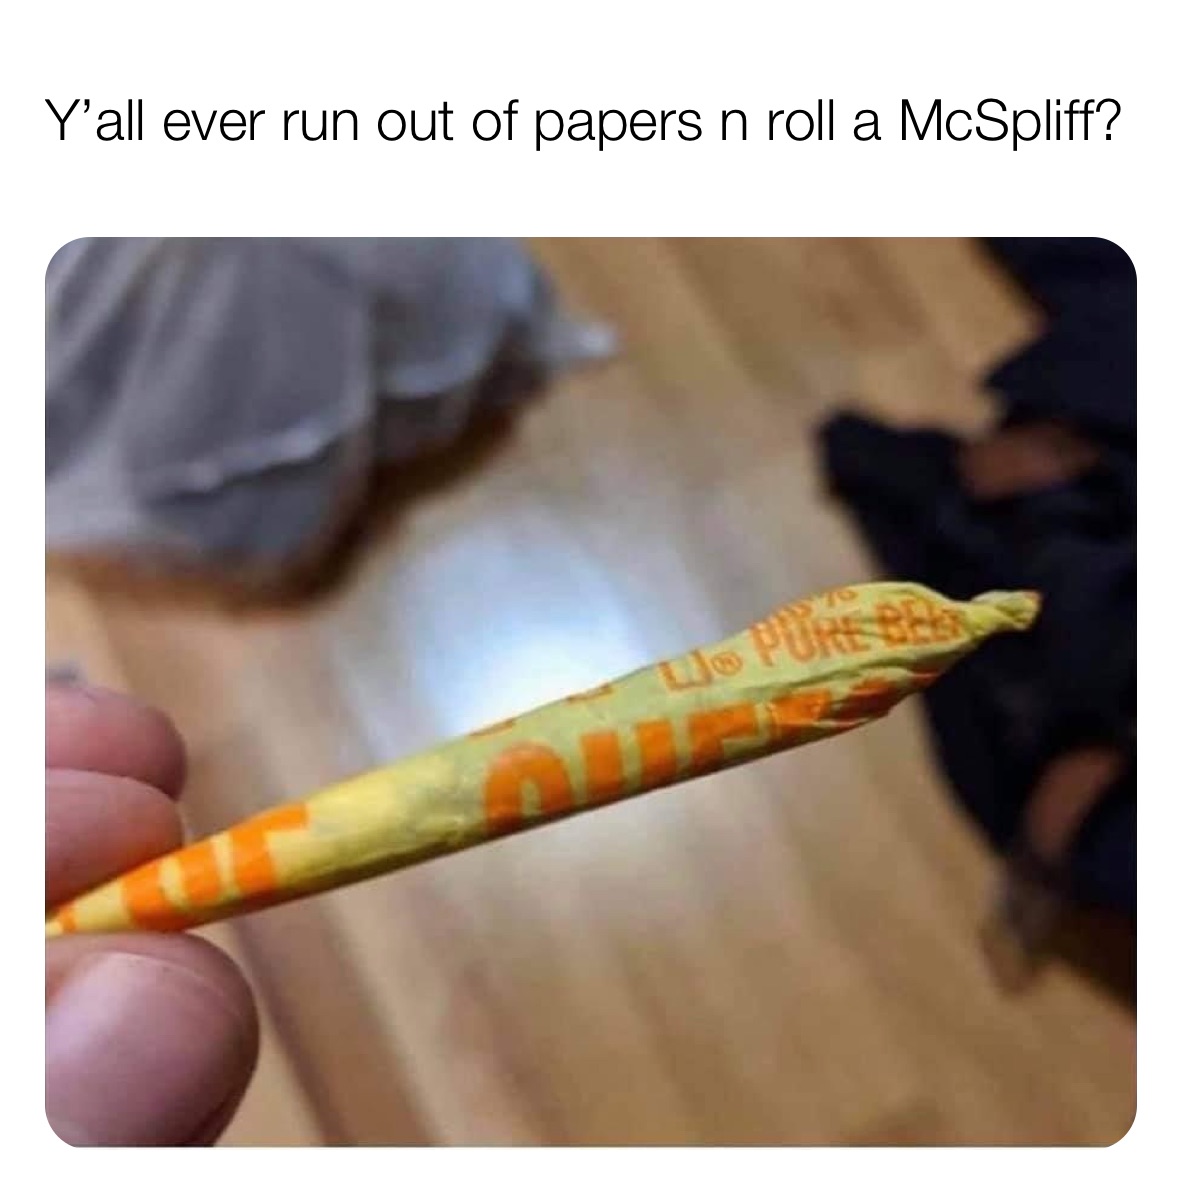 Y’all ever run out of papers n roll a McSpliff?